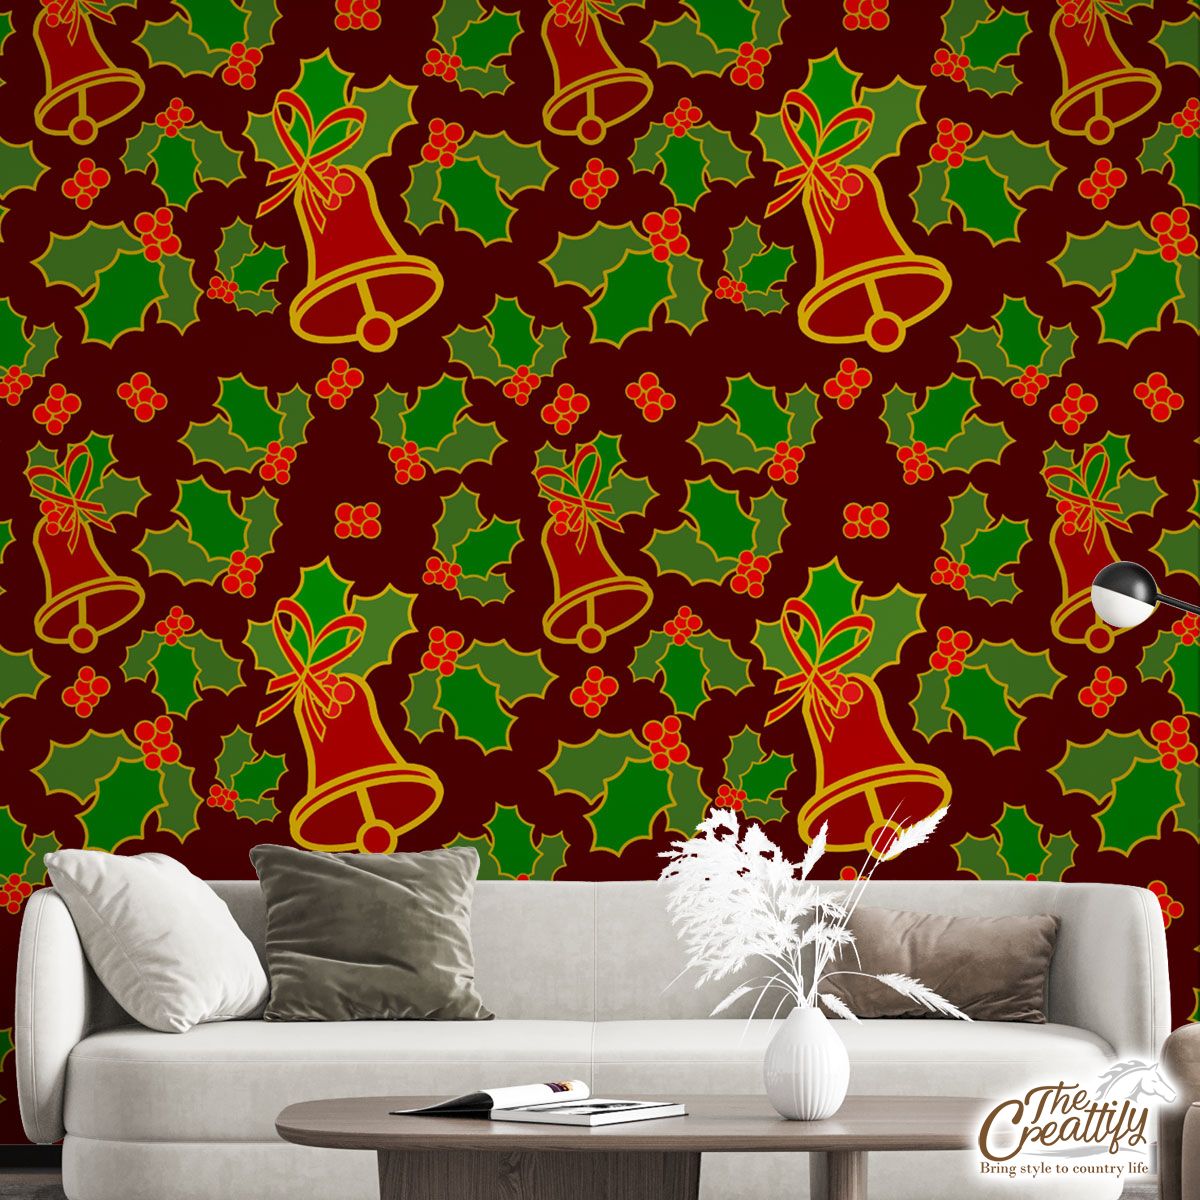 Christmas Bells And Holly Left On The Red Background Wall Mural